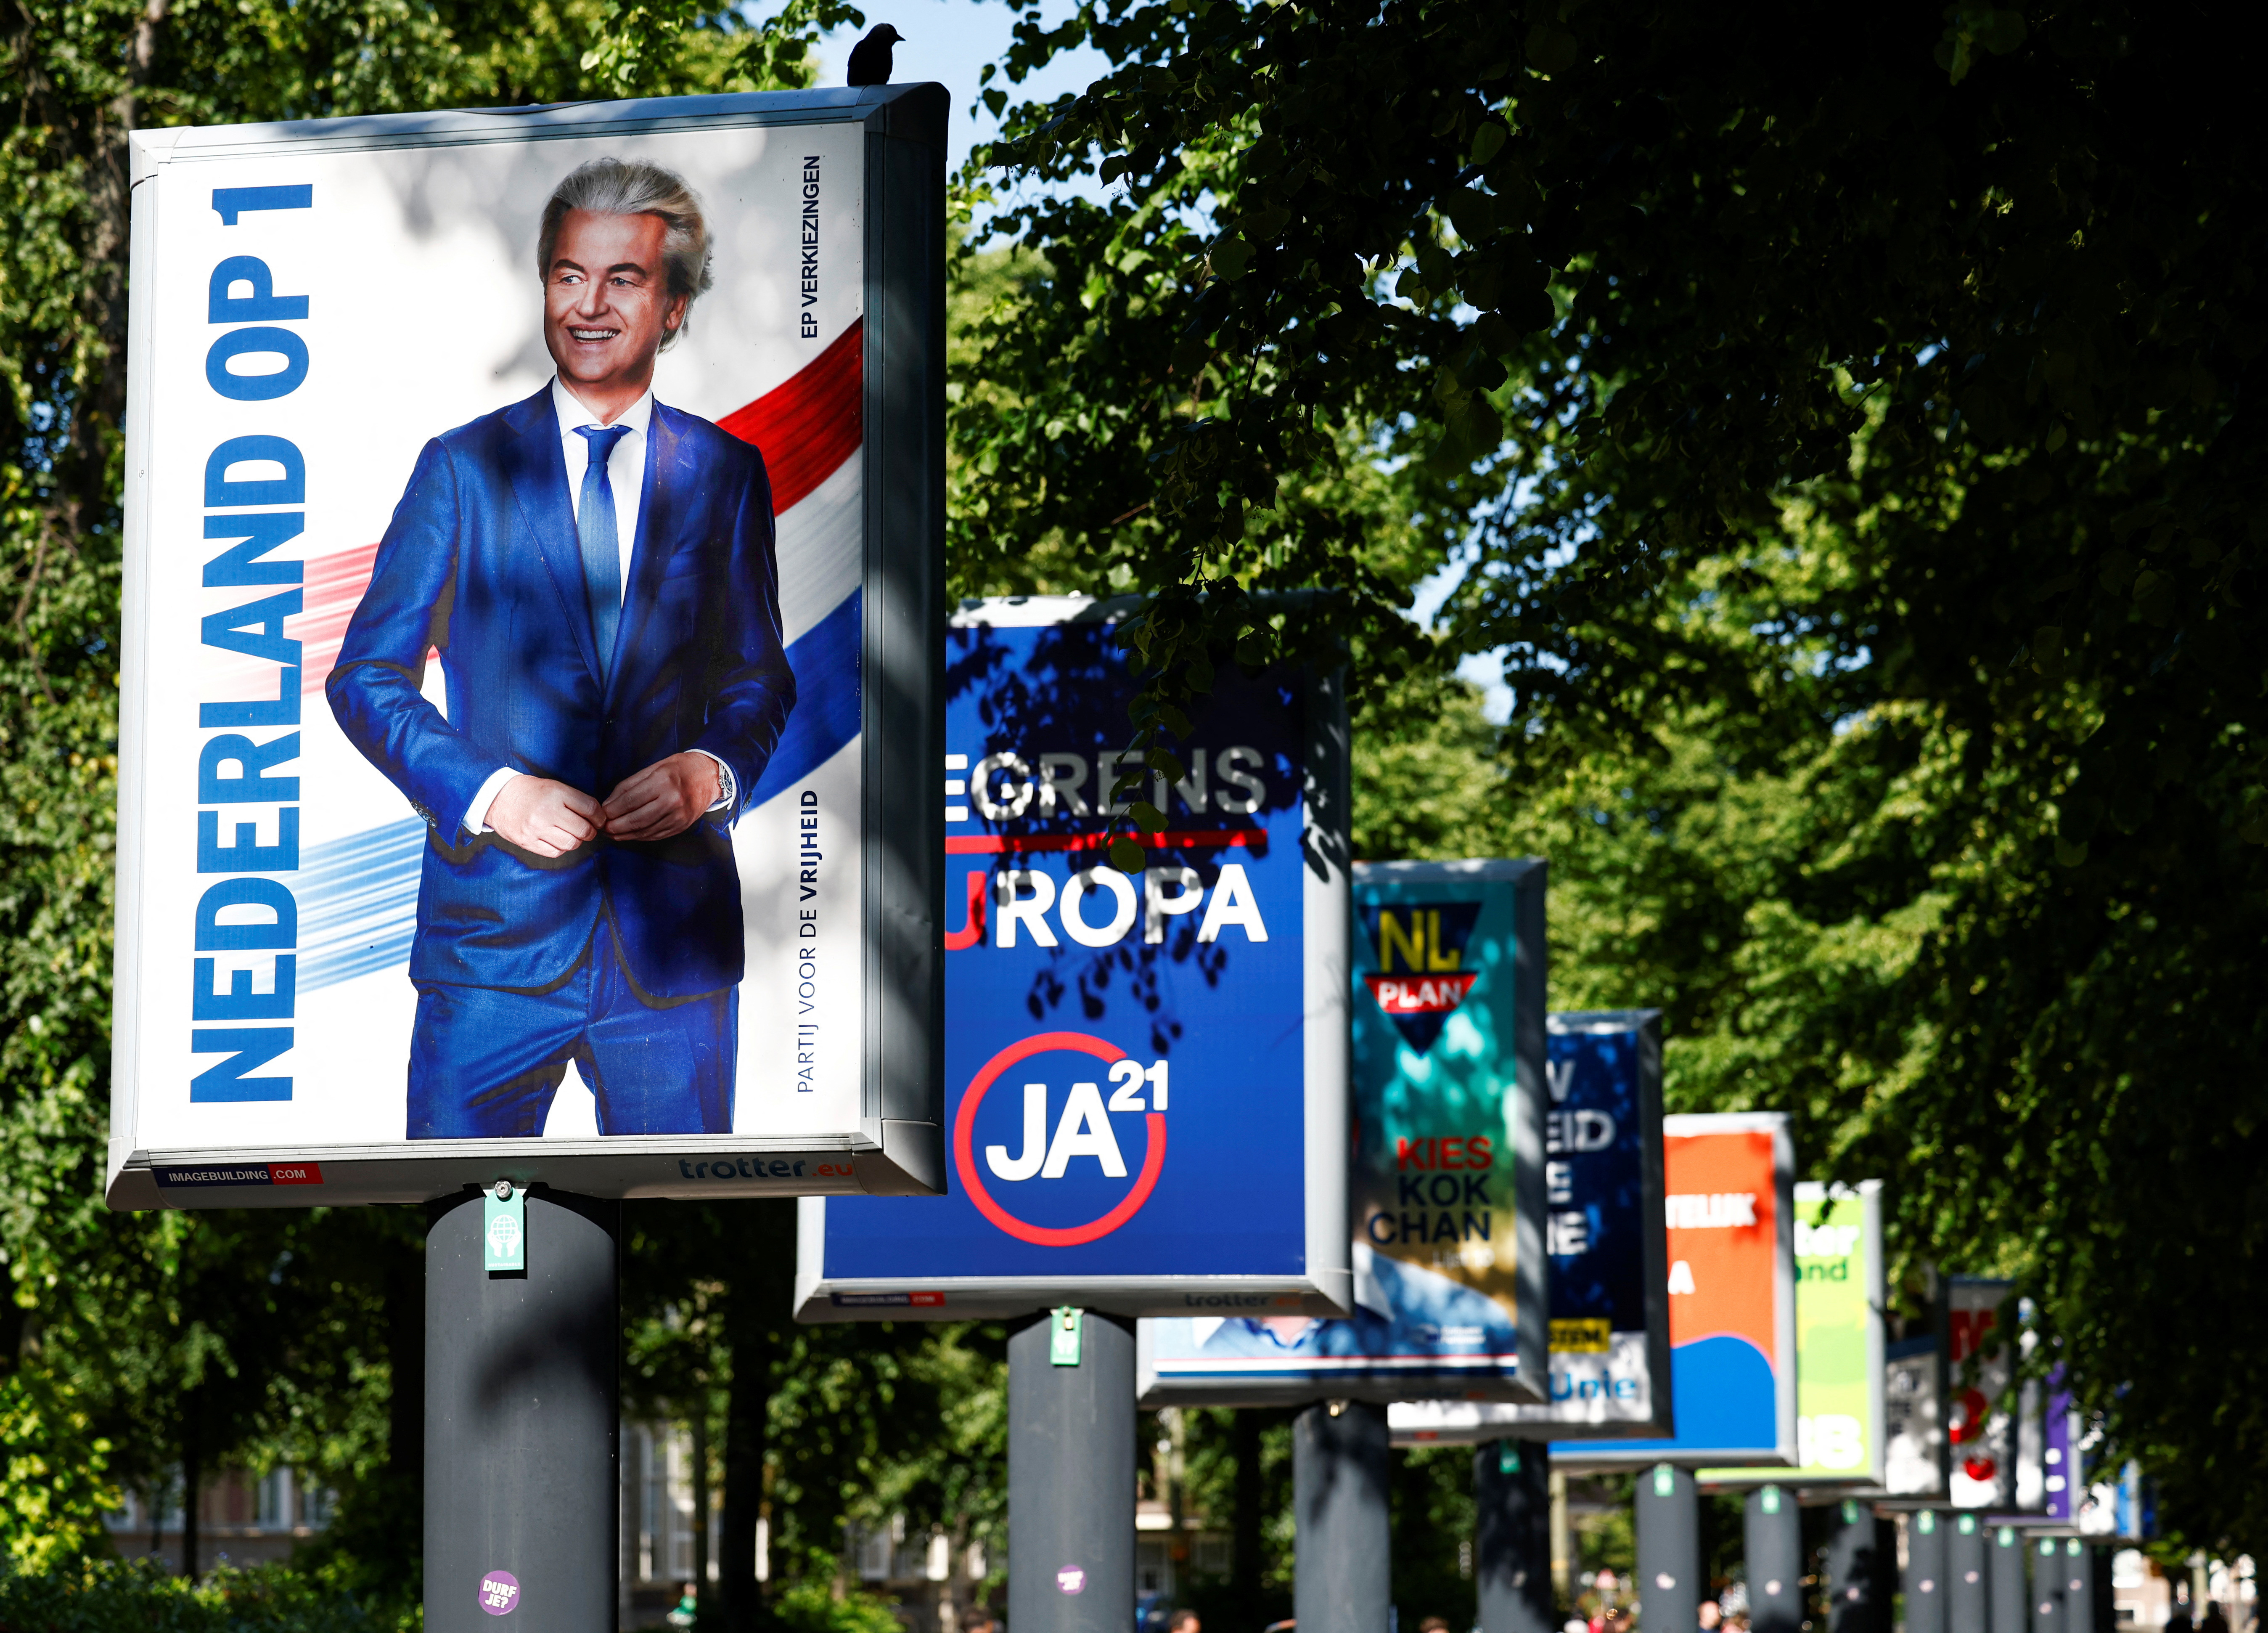 Election campaign boards are displayed, ahead of the elections across 27 European Union member states, in The Hague